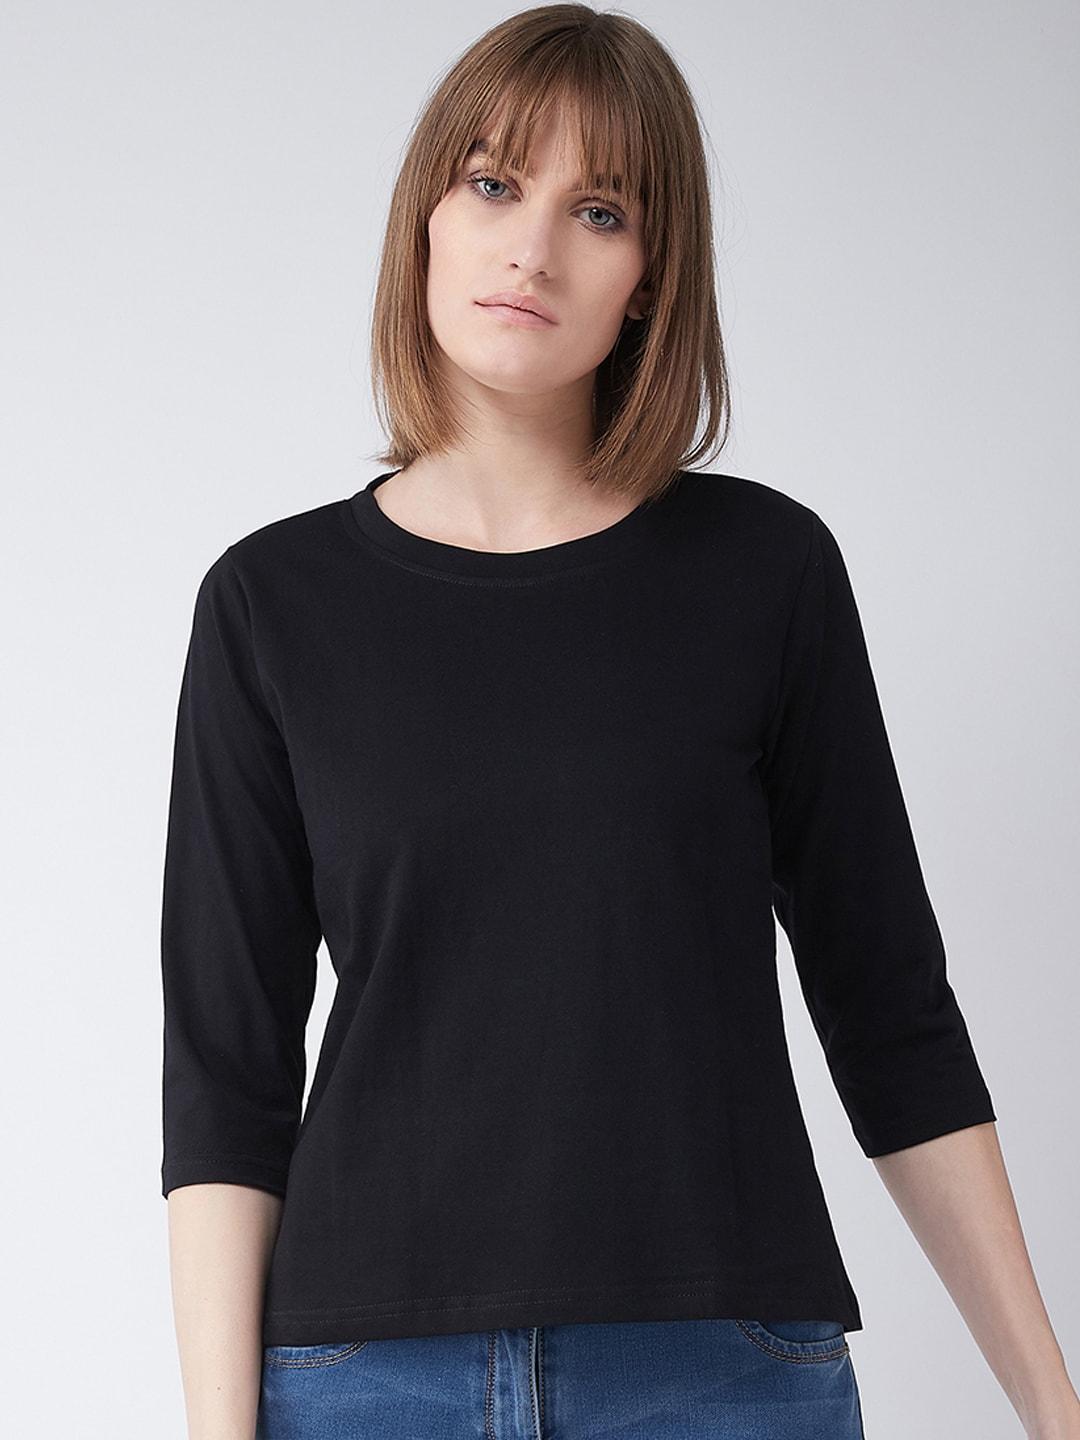 miss-chase-women-black-solid-round-neck-t-shirt